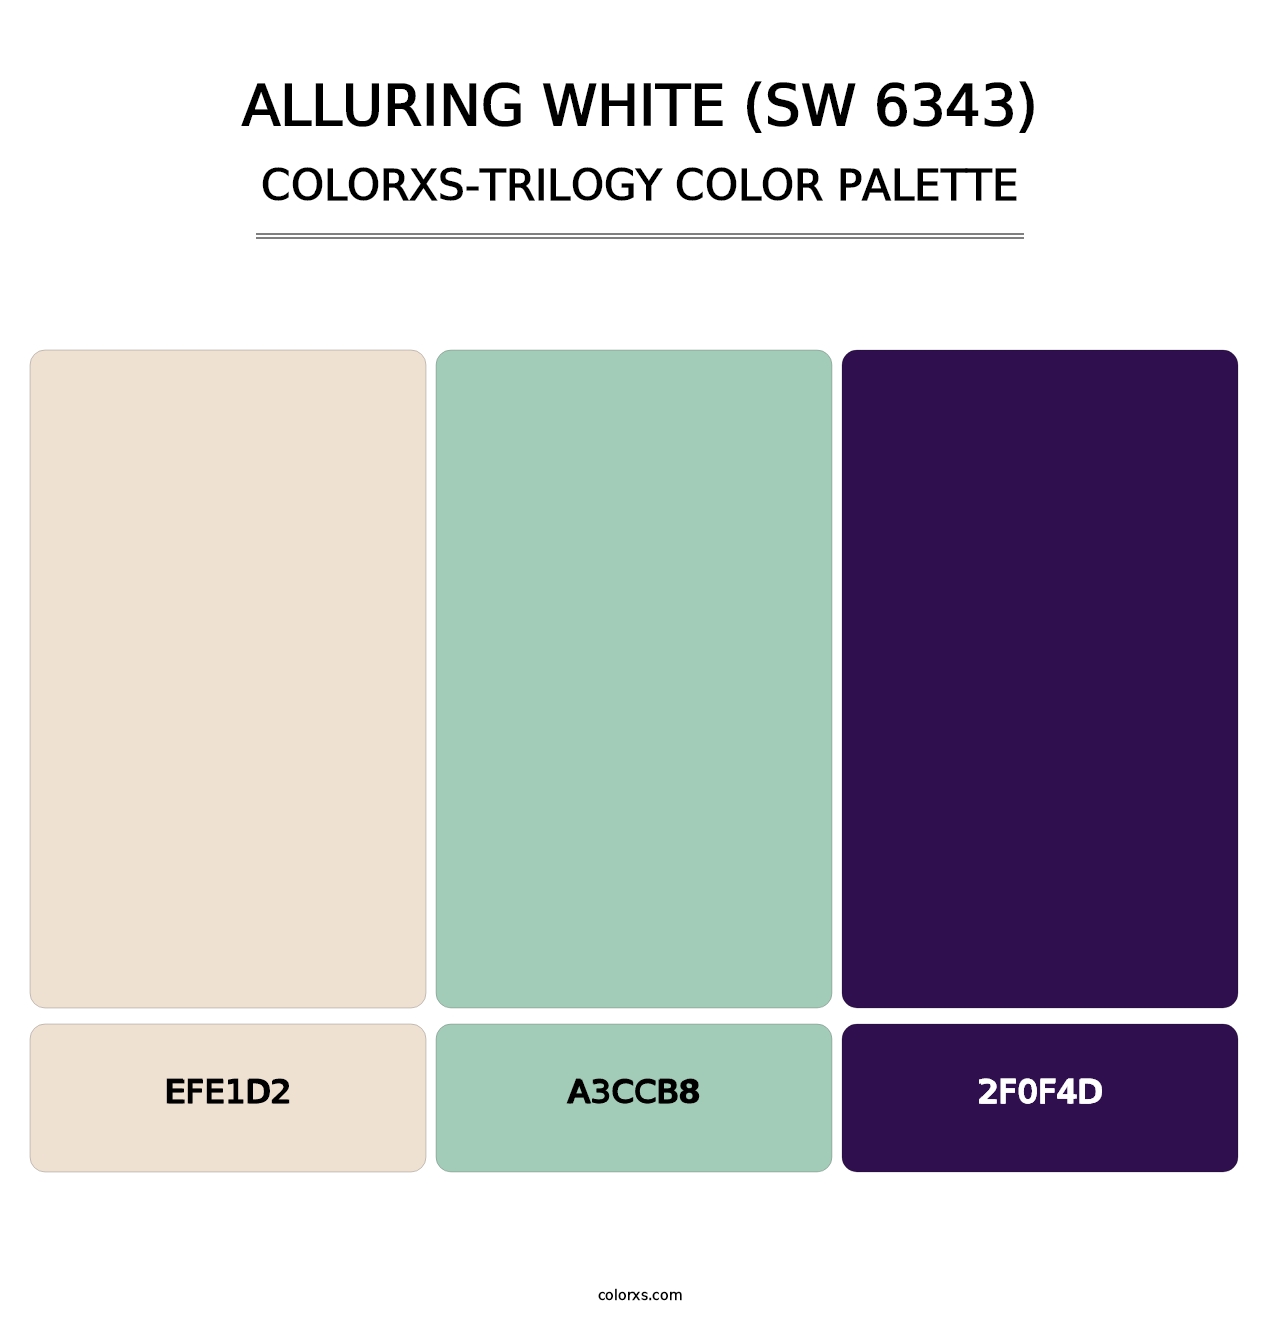 Alluring White (SW 6343) - Colorxs Trilogy Palette